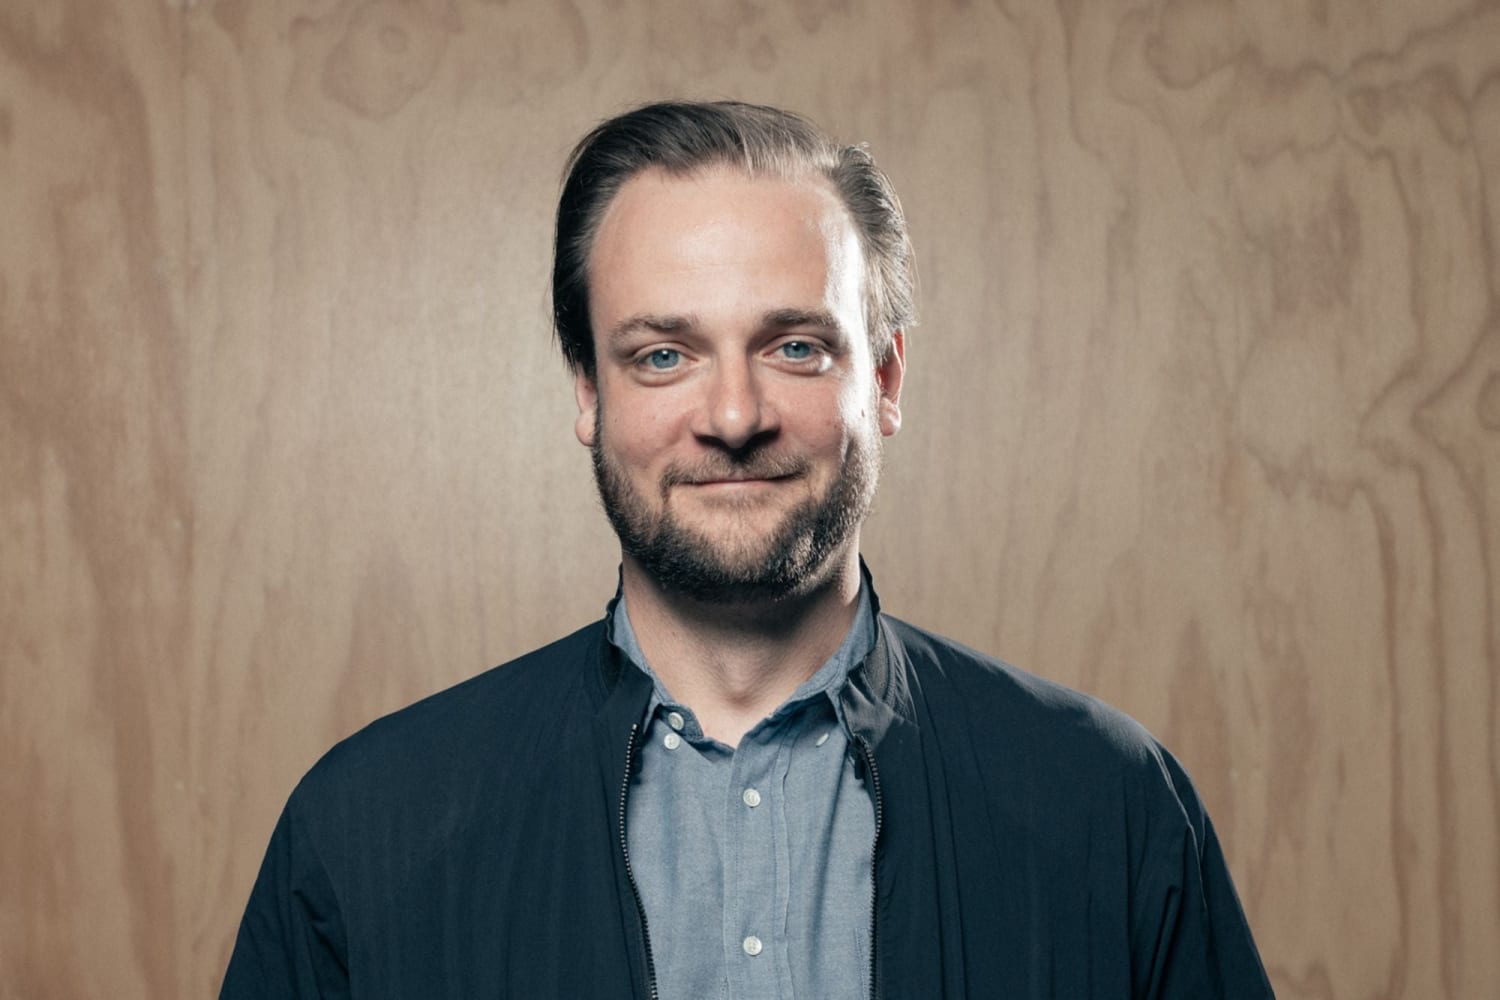 Pinterest Co-Founder Shares the Simple Step He Took to Transform His Communication Style